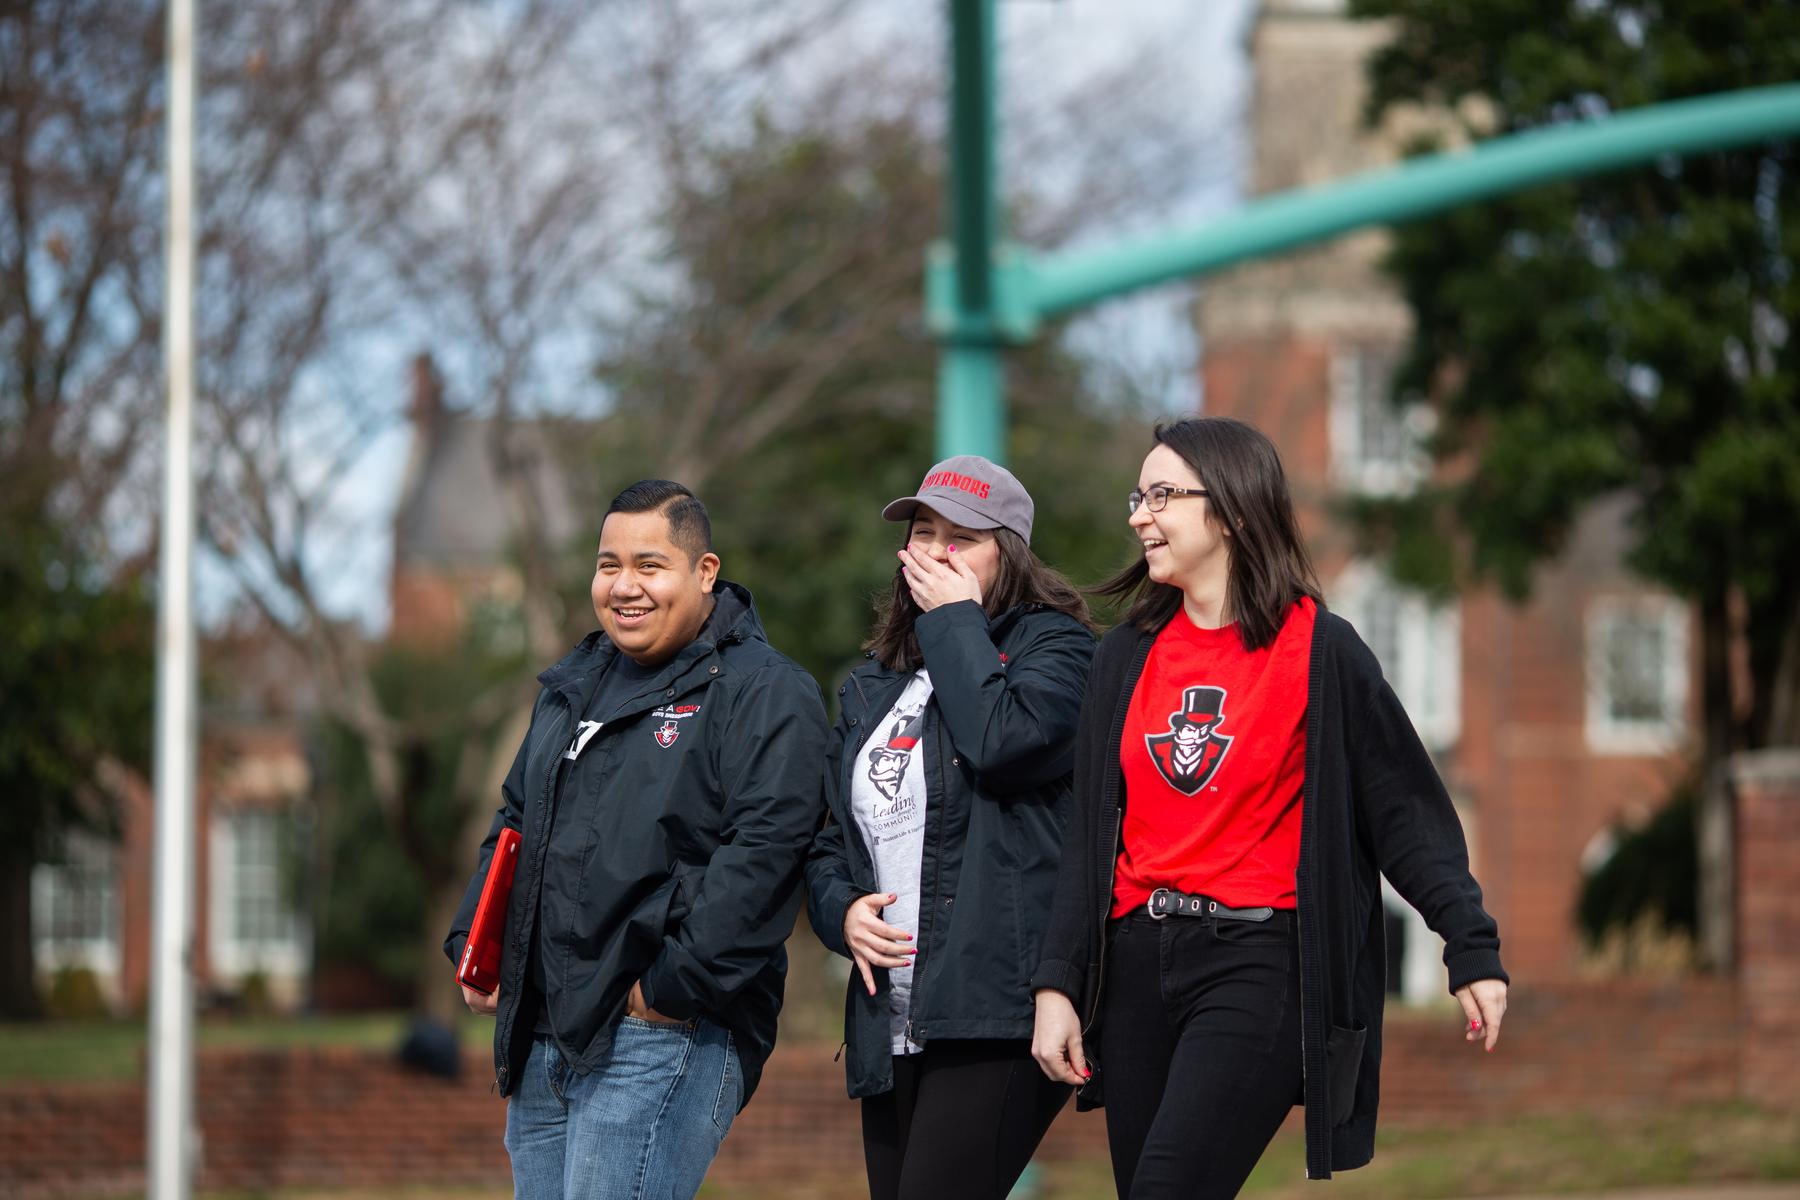 APSU students share a laugh while walking across campus.